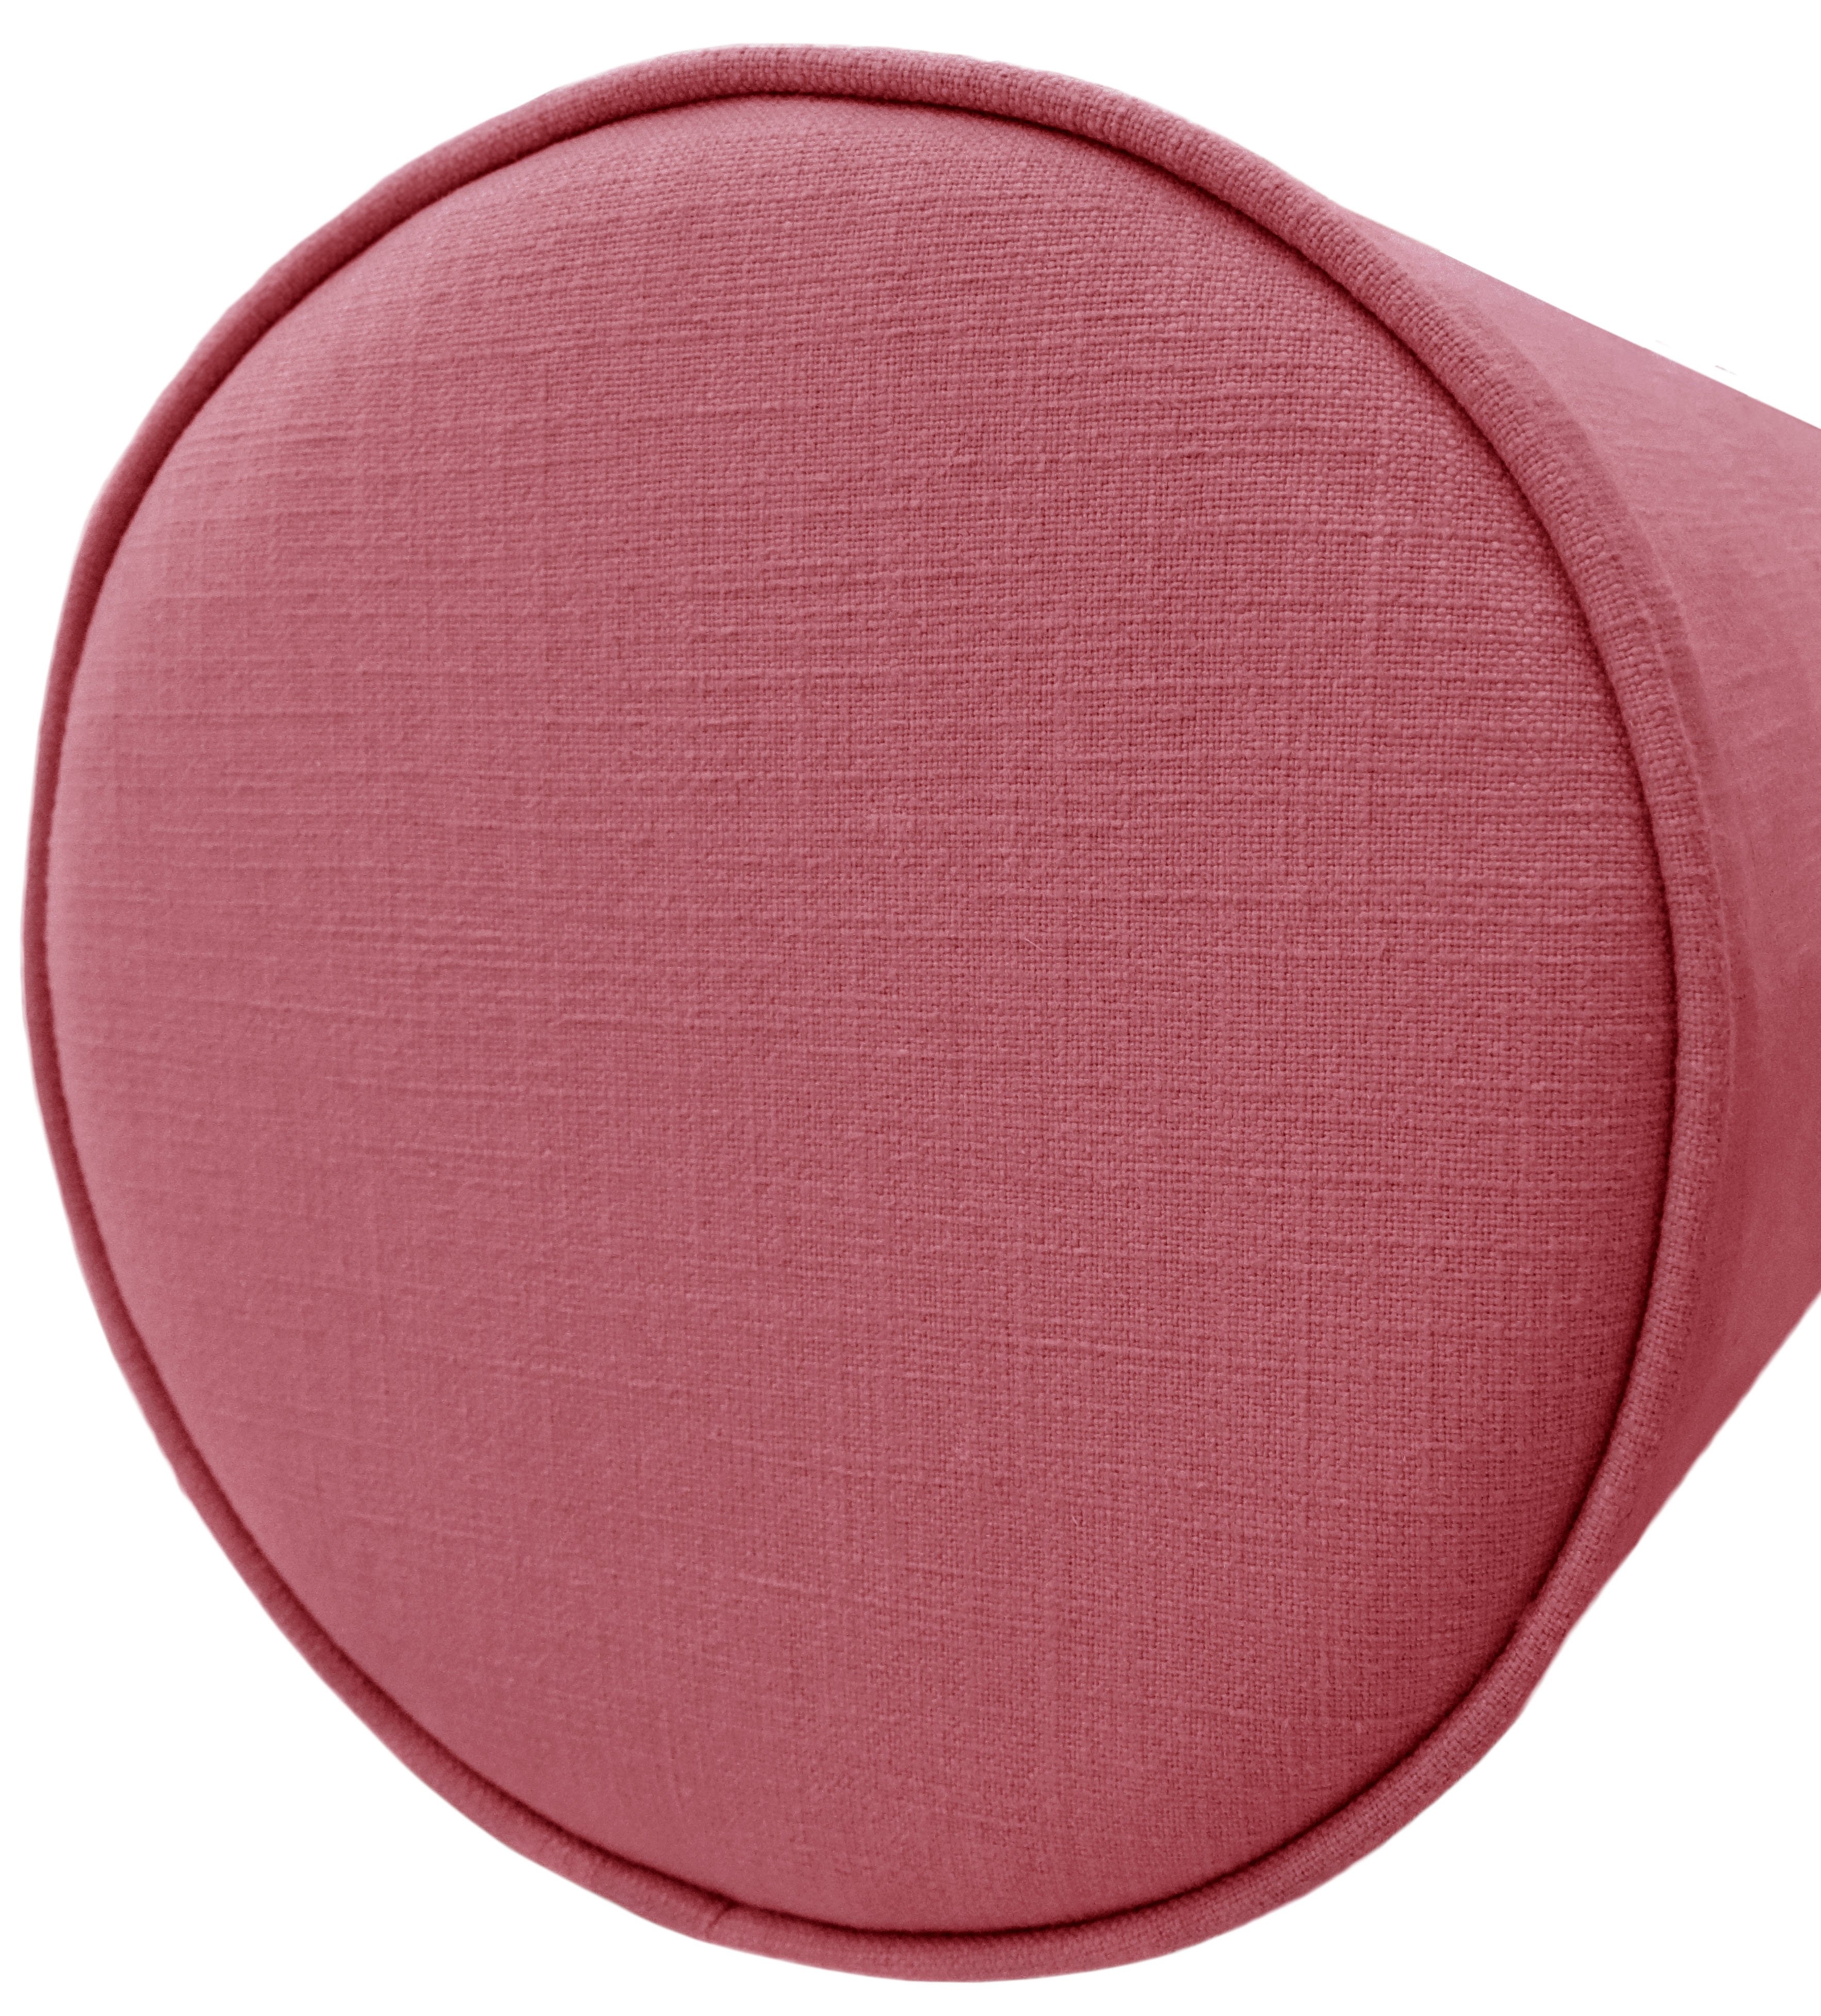 The Bolster :: Classic Linen // Rosé Pink (new) - KING // 9" X 48" - Image 2